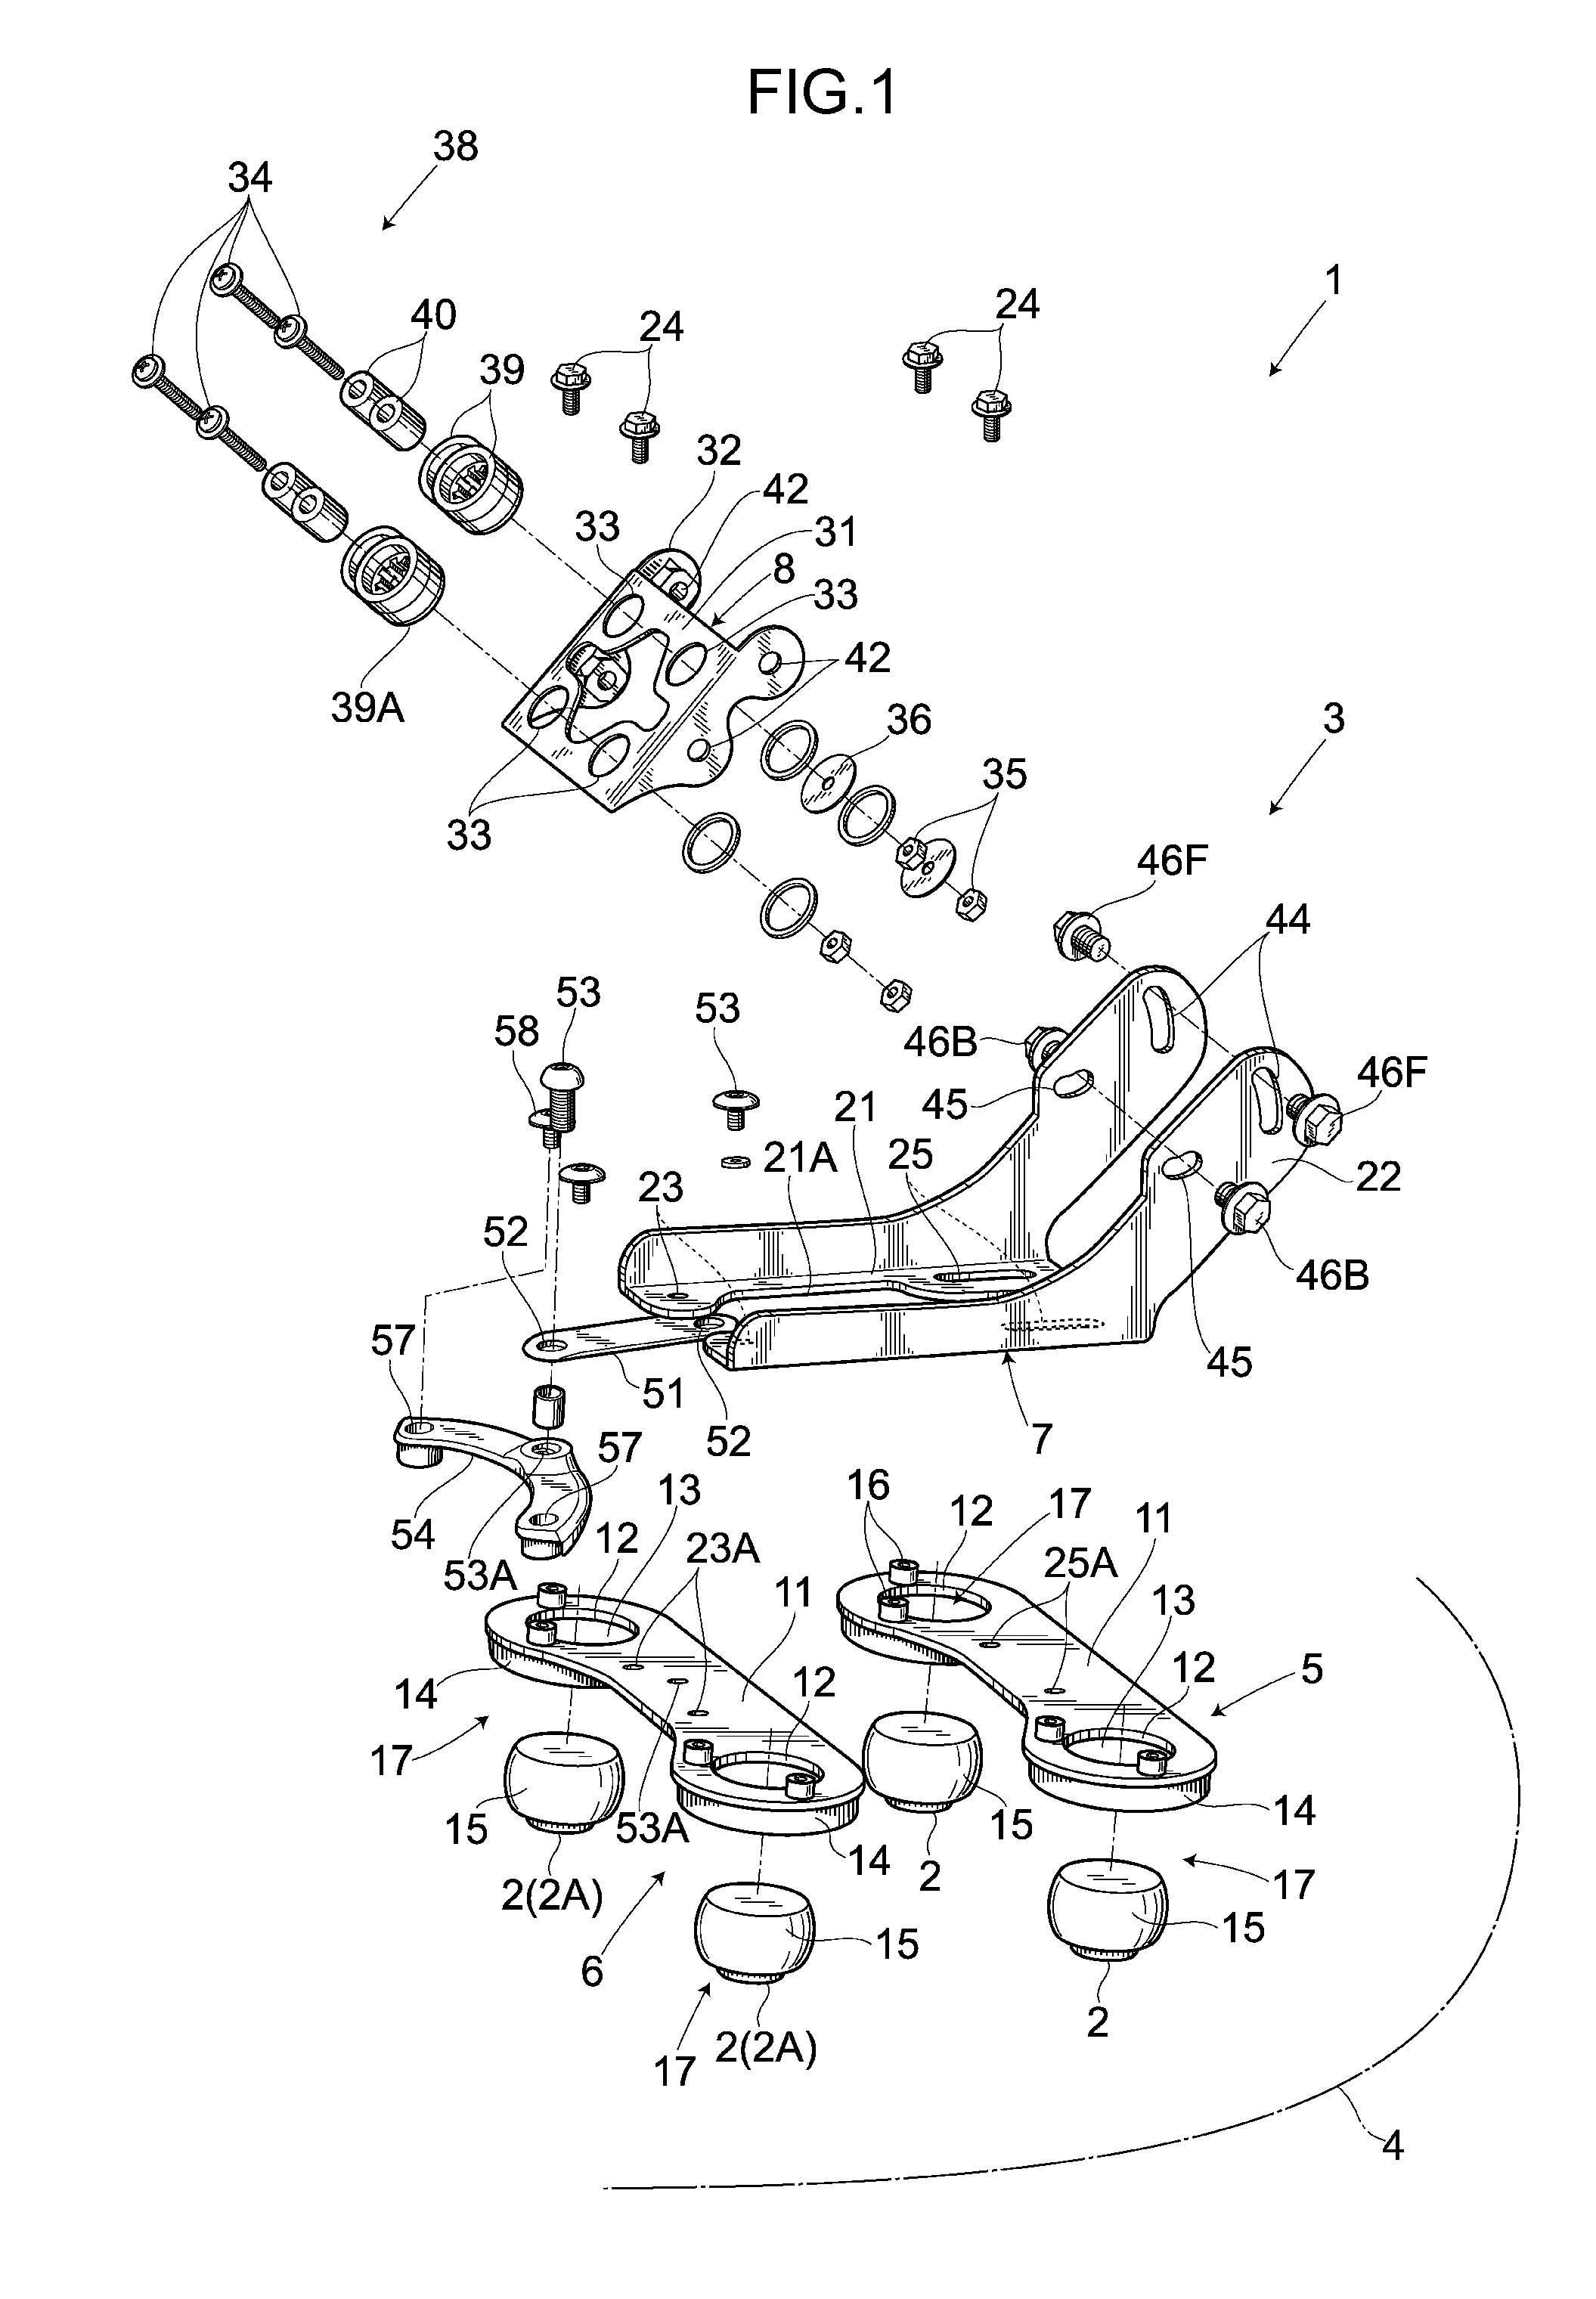 Accessory mounting device for saddle riding type vehicle